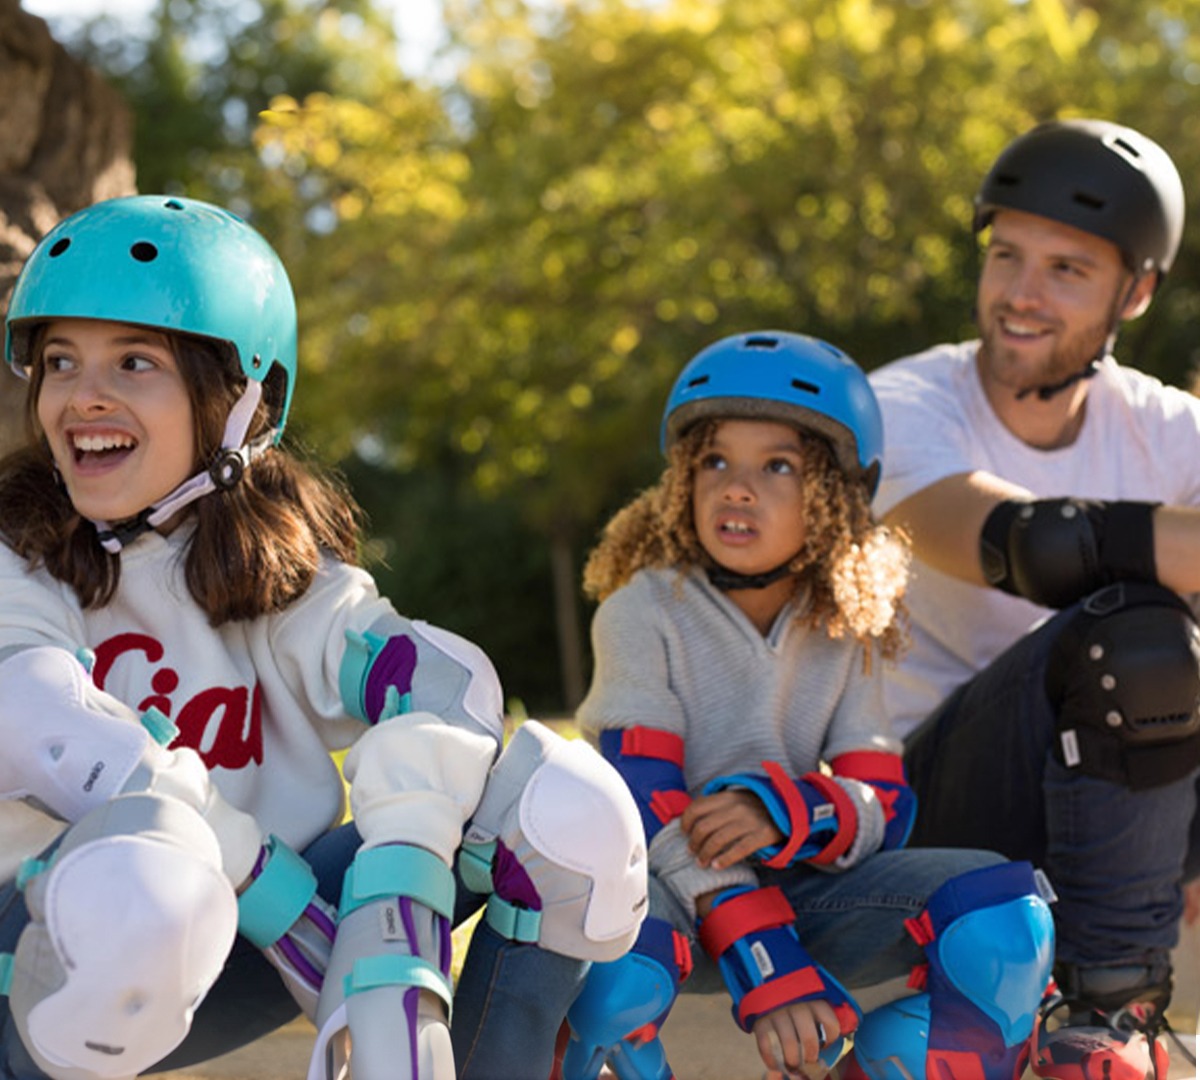 Skateboarding-Helmets-and-pads-Top-Rated-Skates-and-Scooters-for-all-Ages-and-Skill-Levels-at-Decathlon